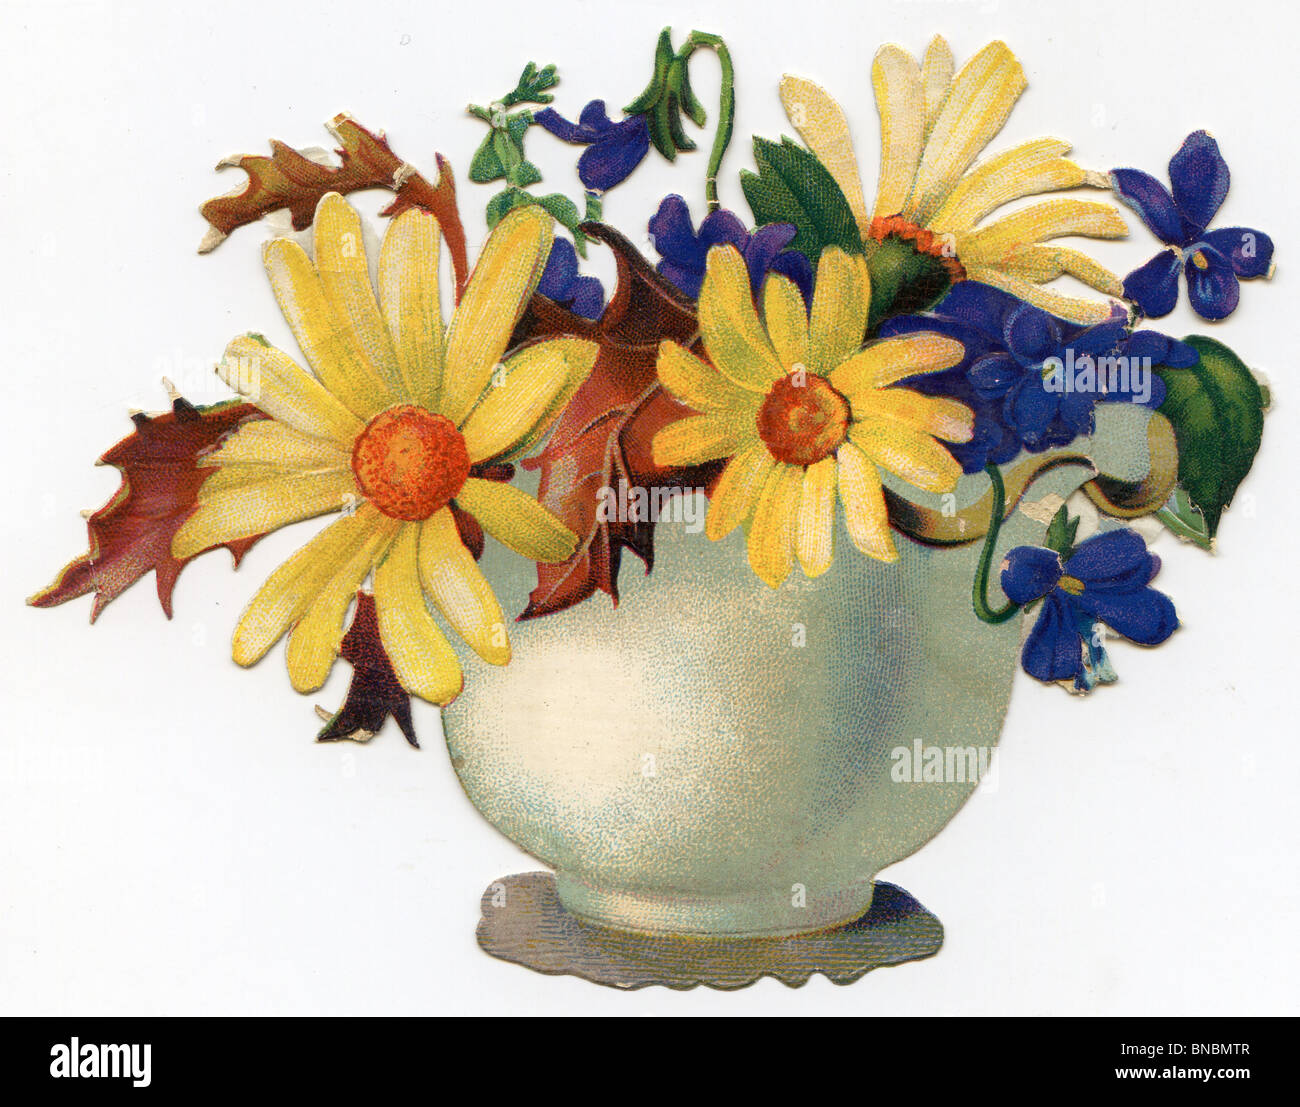 Vase of Violets and Yellow Daisies Stock Photo